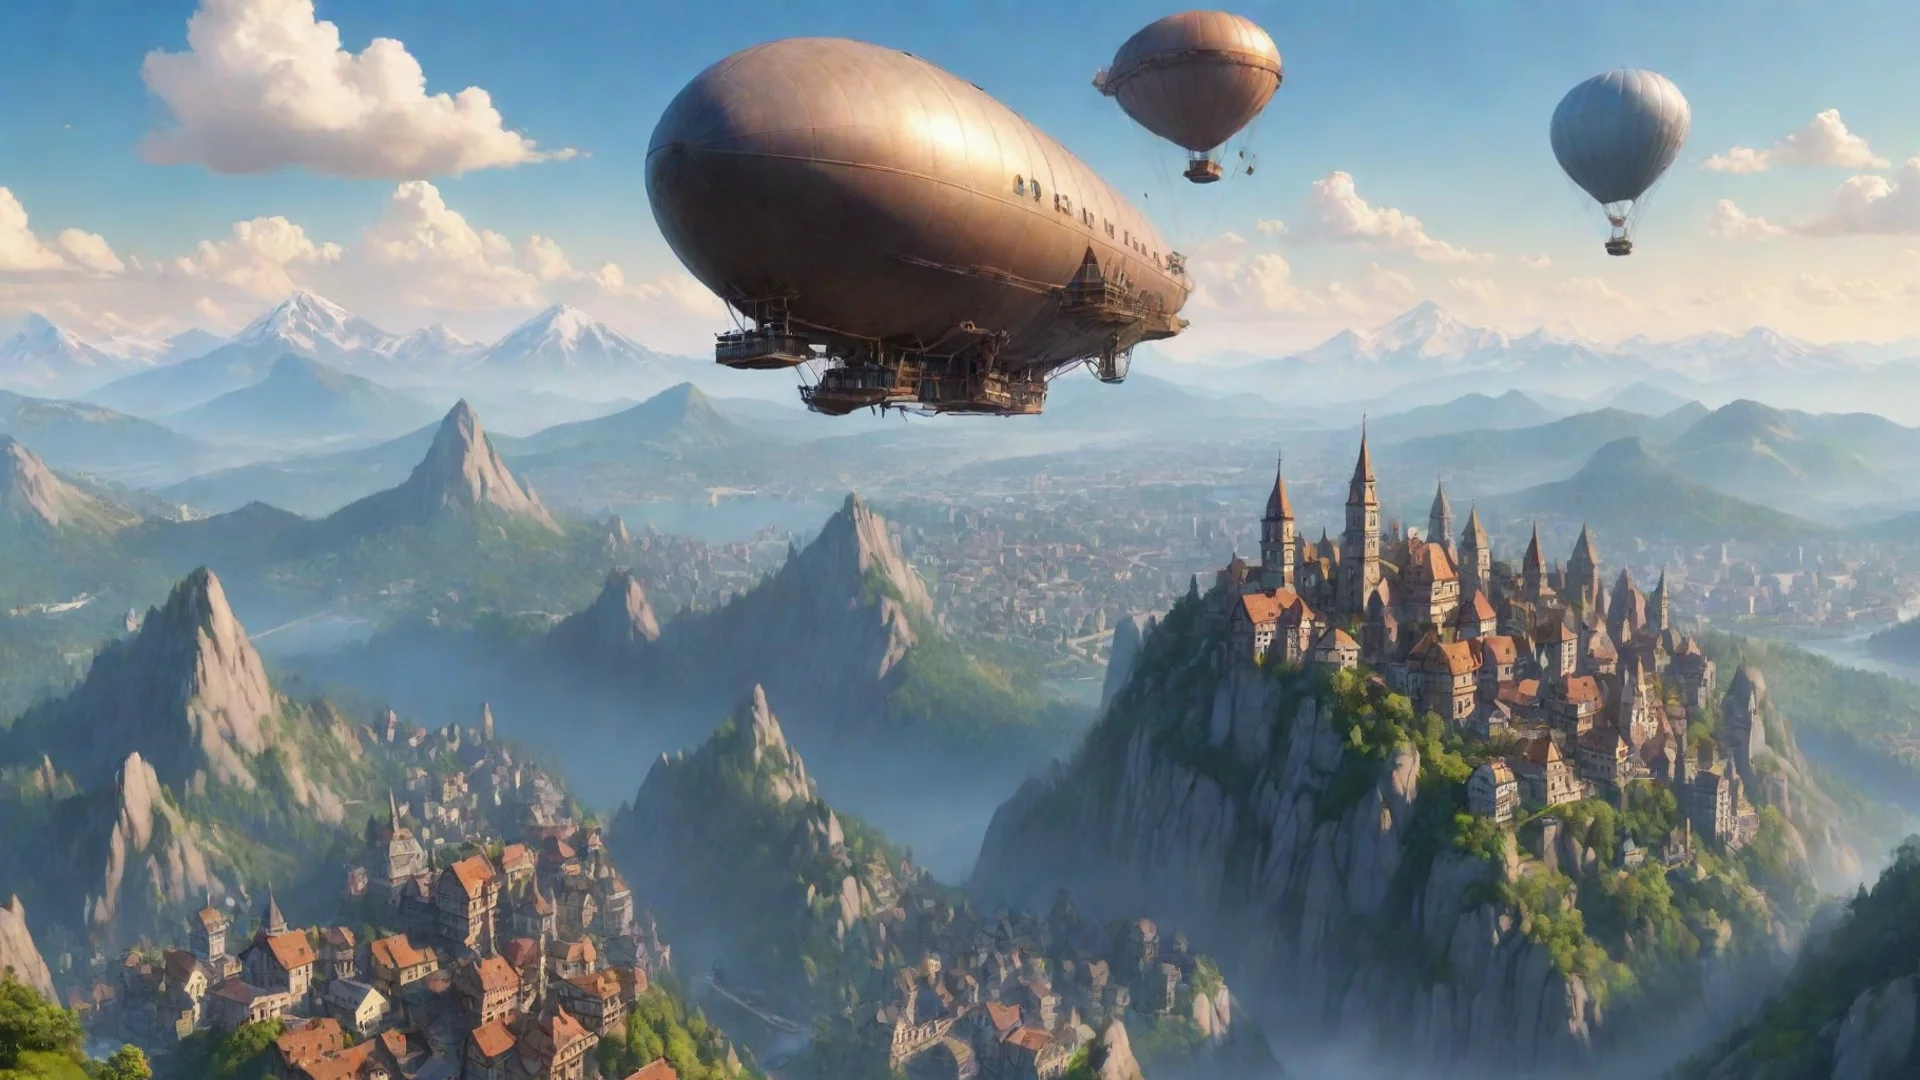 amazing amazing realistic cartoon city flying airship mountain top relaxing calm hd aesthetic peace awesome portrait 2 wide